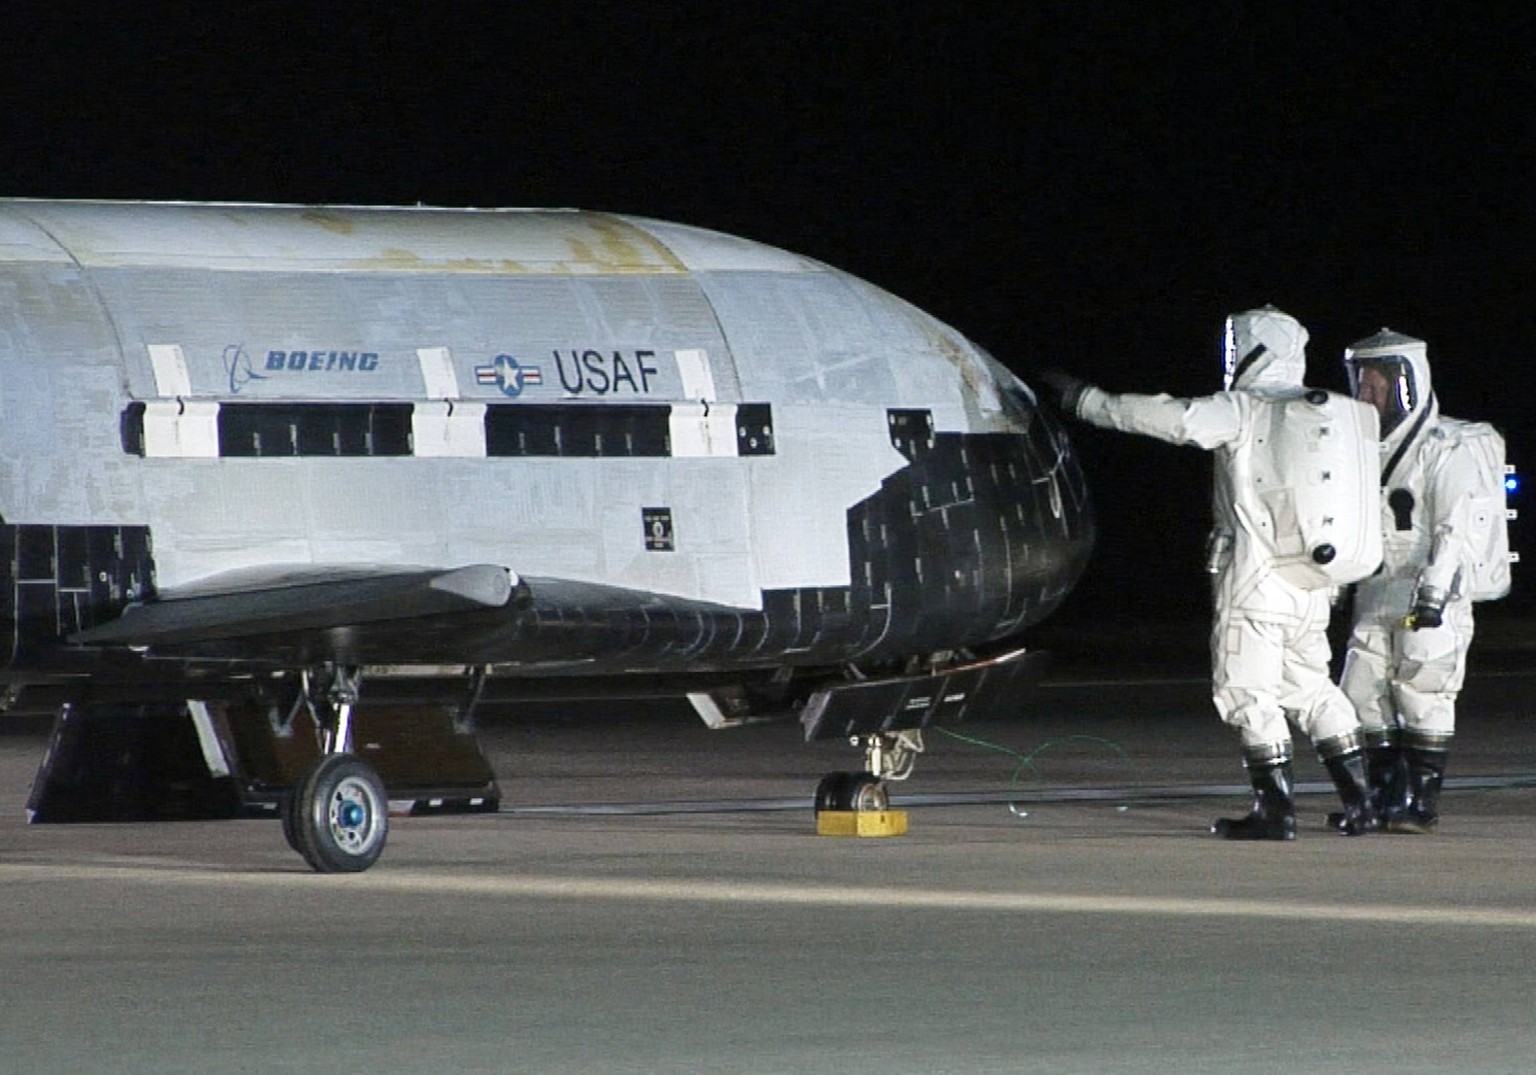 Dec. 11, 2012 - (FILE PHOTO) - The X-37B Orbital Test Vehicle, an experimental robotic space plane, was launched into orbit atop an Atlas V rocket Tuesday. PICTURED: The U.S. Air Force X-37B sits on t ...